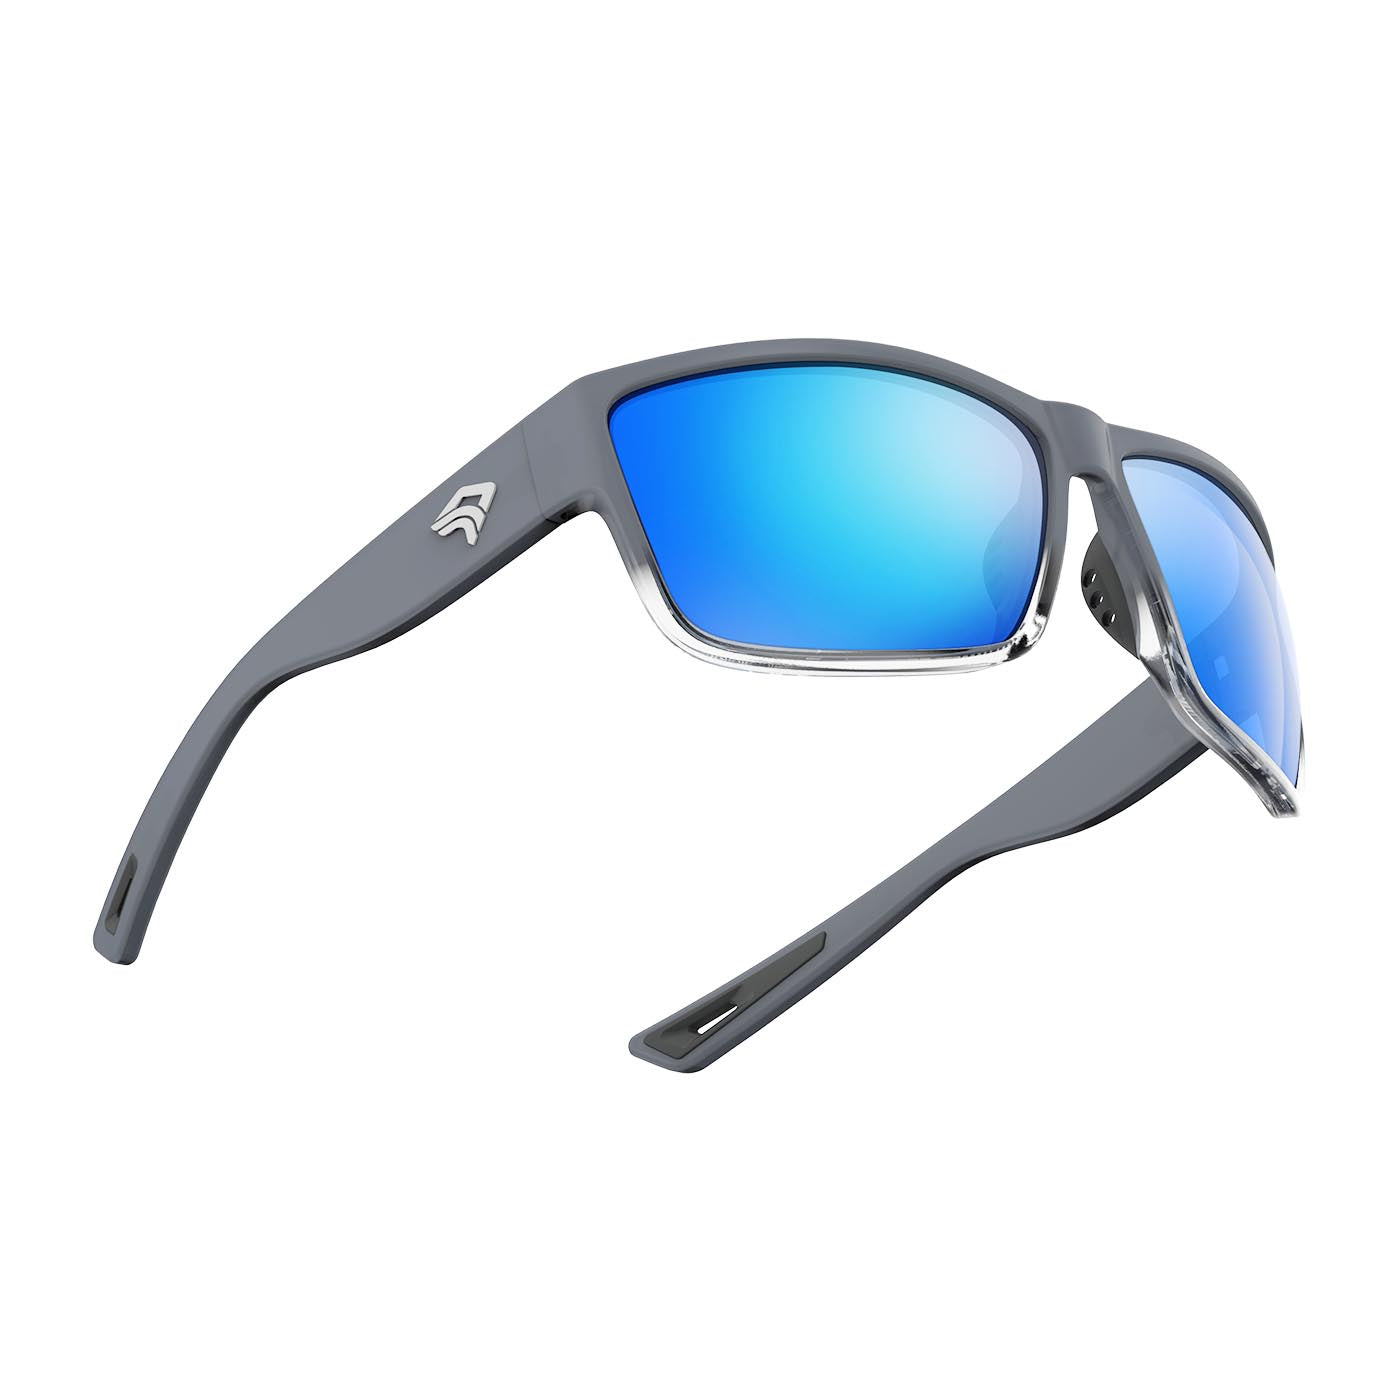 Pure Polarized Sports Sunglasses with Lifetime Warranty - Adjustable and  Flexible Frame - Ideal for Men and Women - Ideal for Cycling, Running,  Golf, and Fishing - Matte Grey To Half Transparent